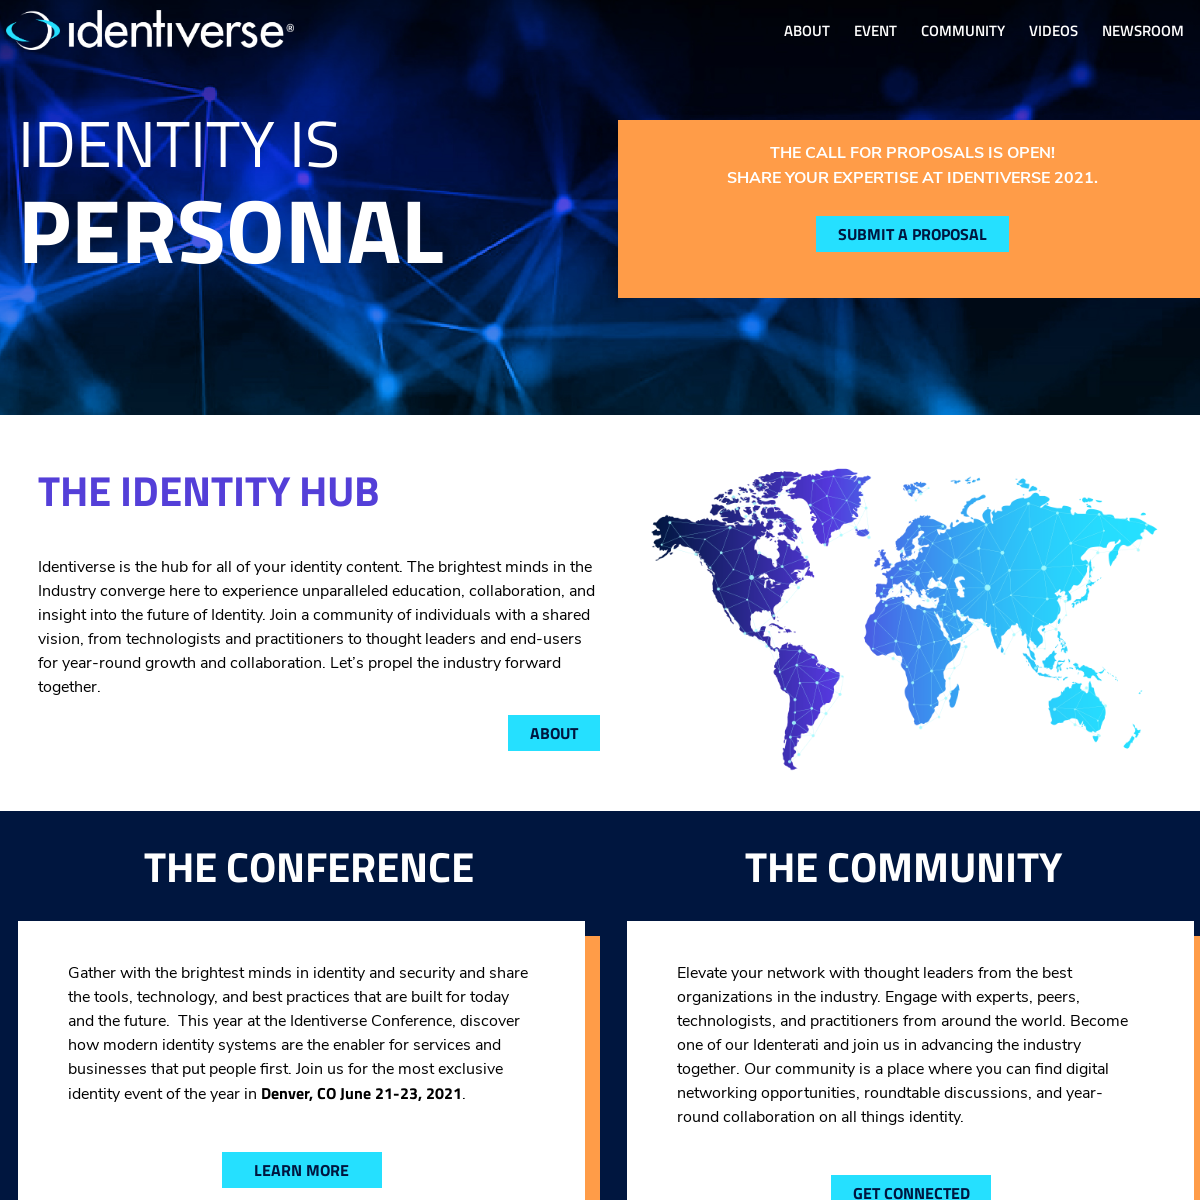 A complete backup of identiverse.com